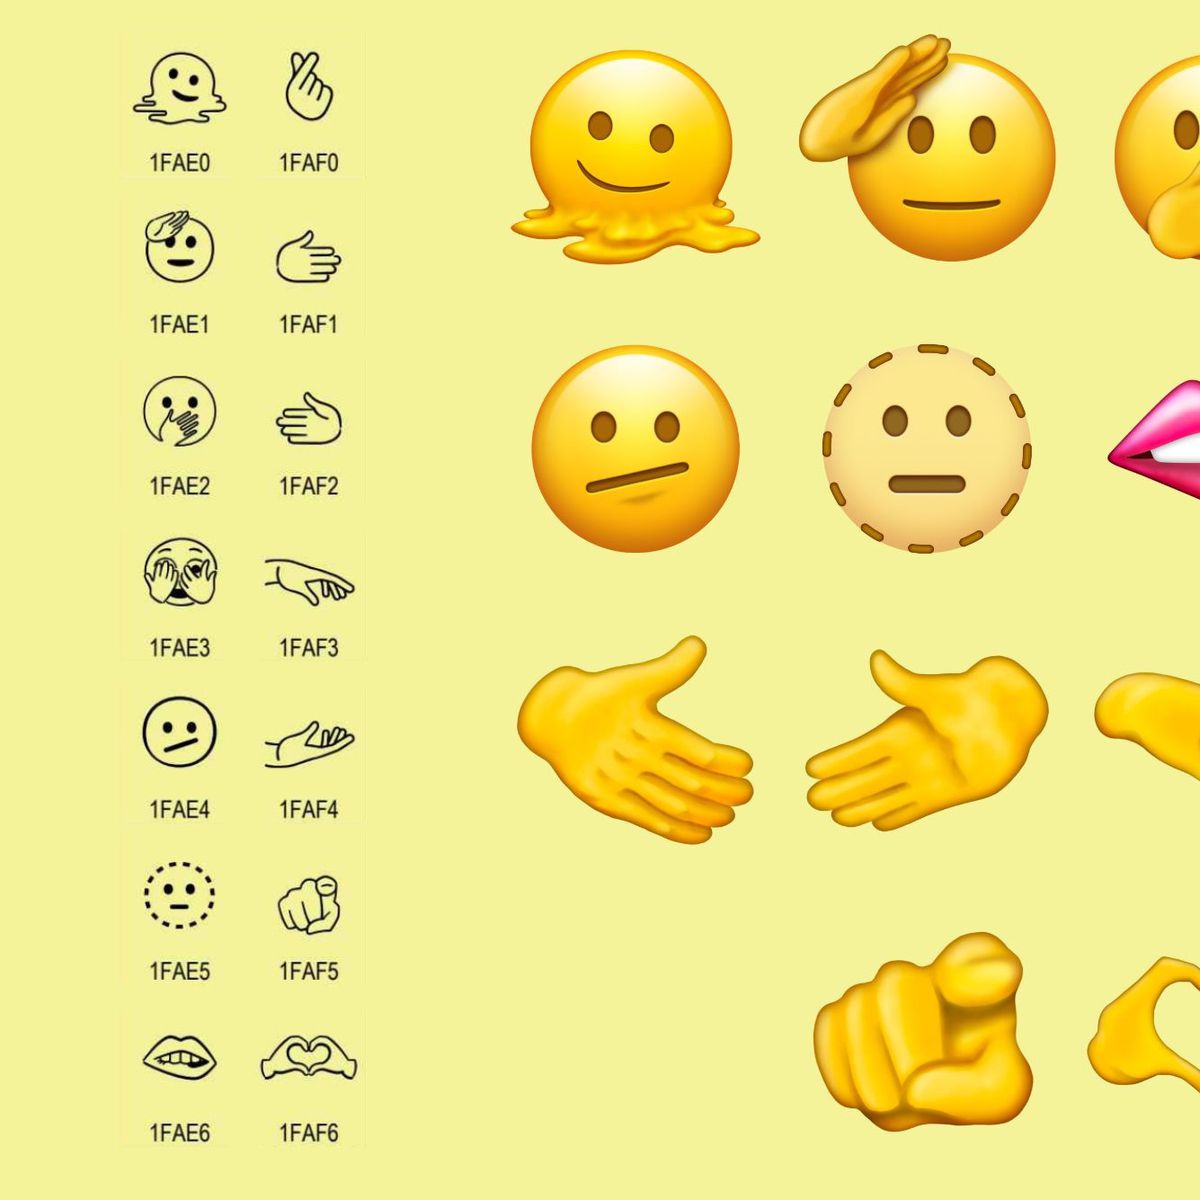 Next Emojis Will Include Melting Face, Biting Lip, Heart Hands, Troll, and  More - MacRumors